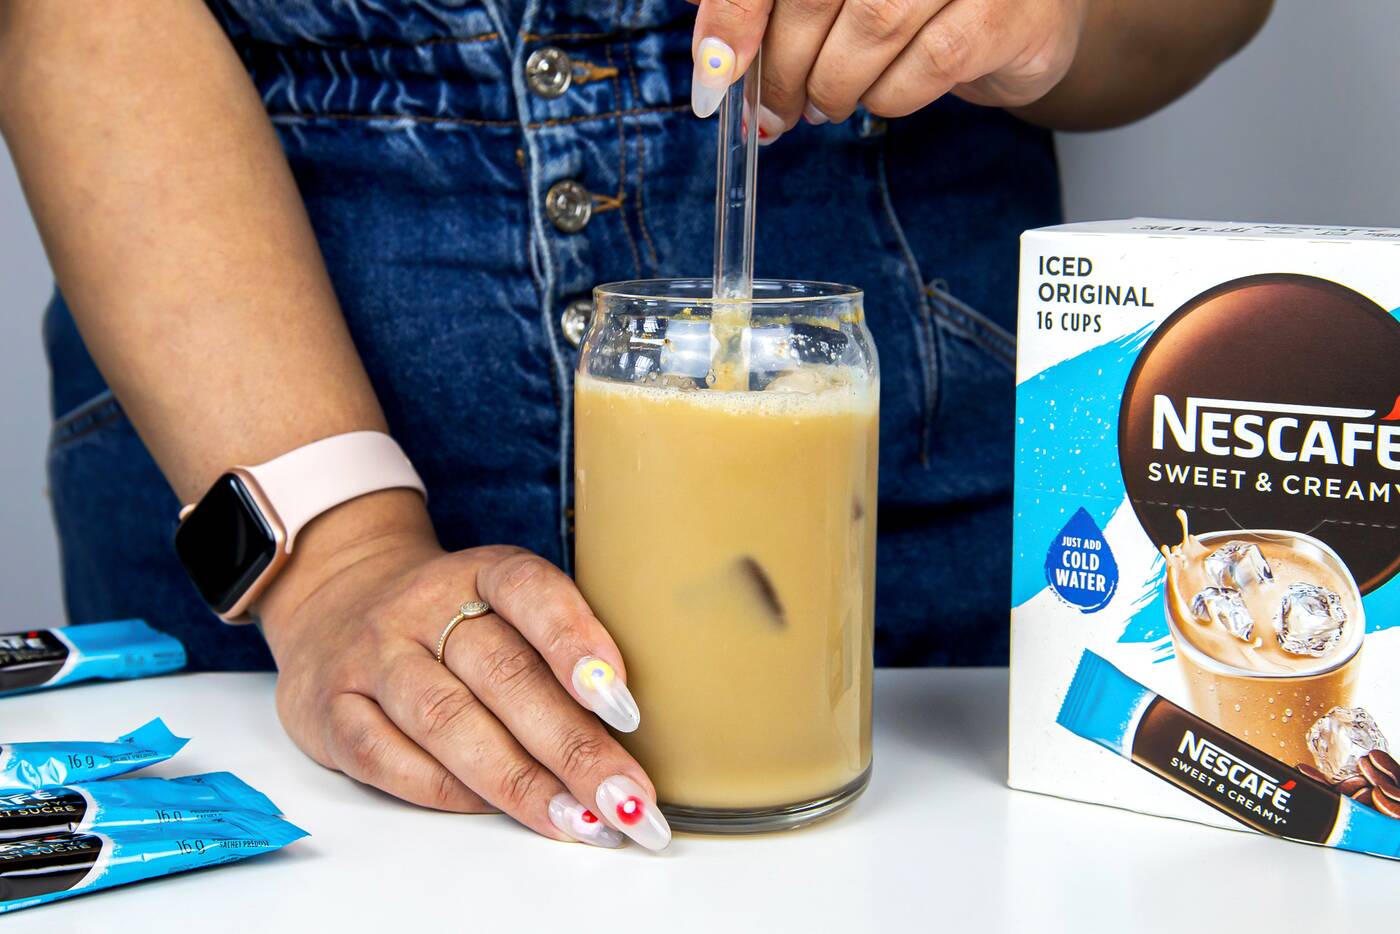 New Nescafe Gold Iced coffee range embraces more stay-at-home